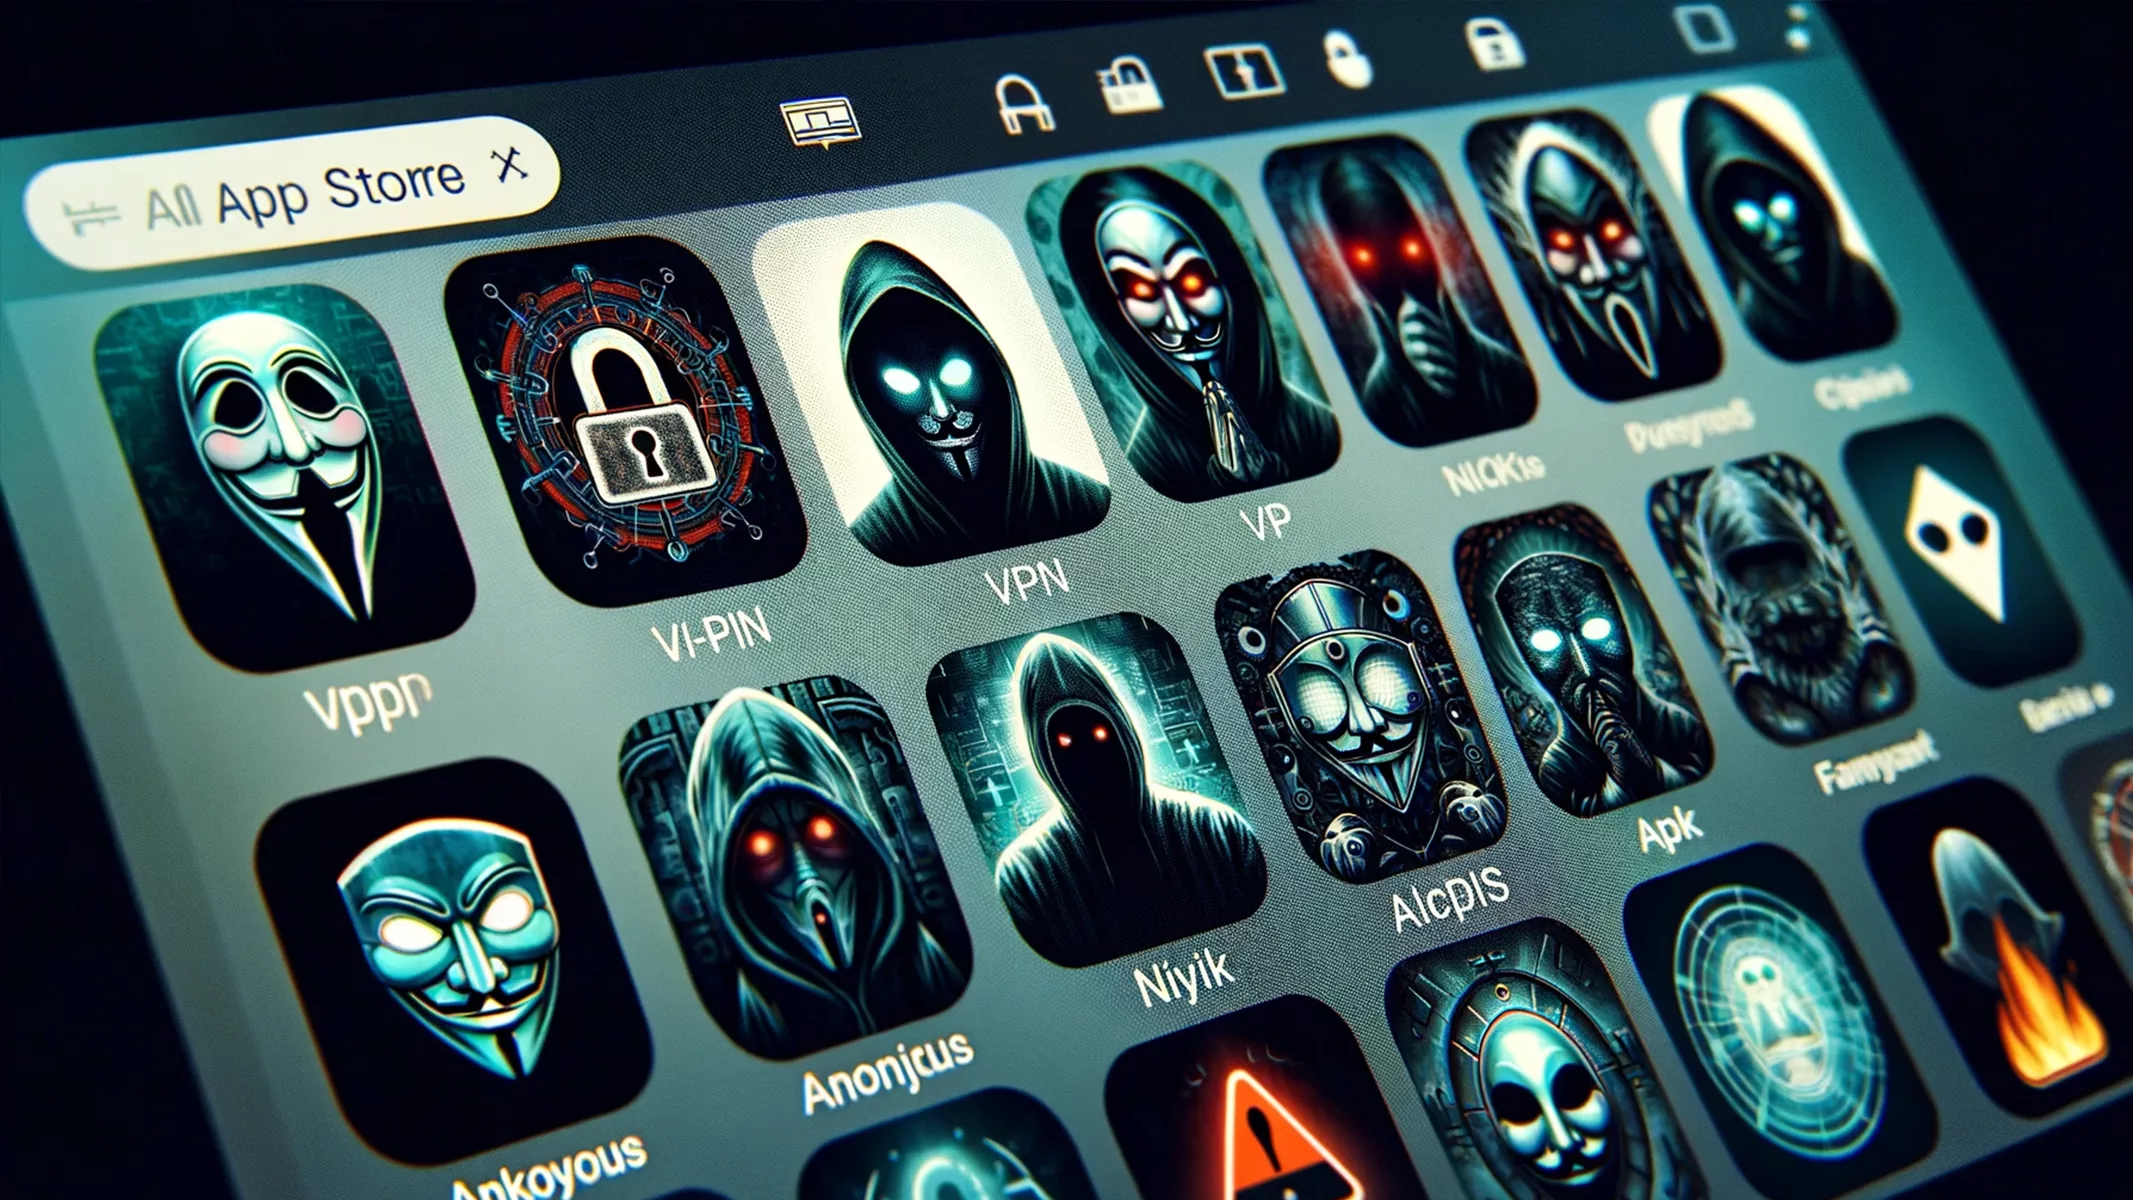 An app store window on a computer screen, featuring a variety of VPN app icons that look shady and dangerous